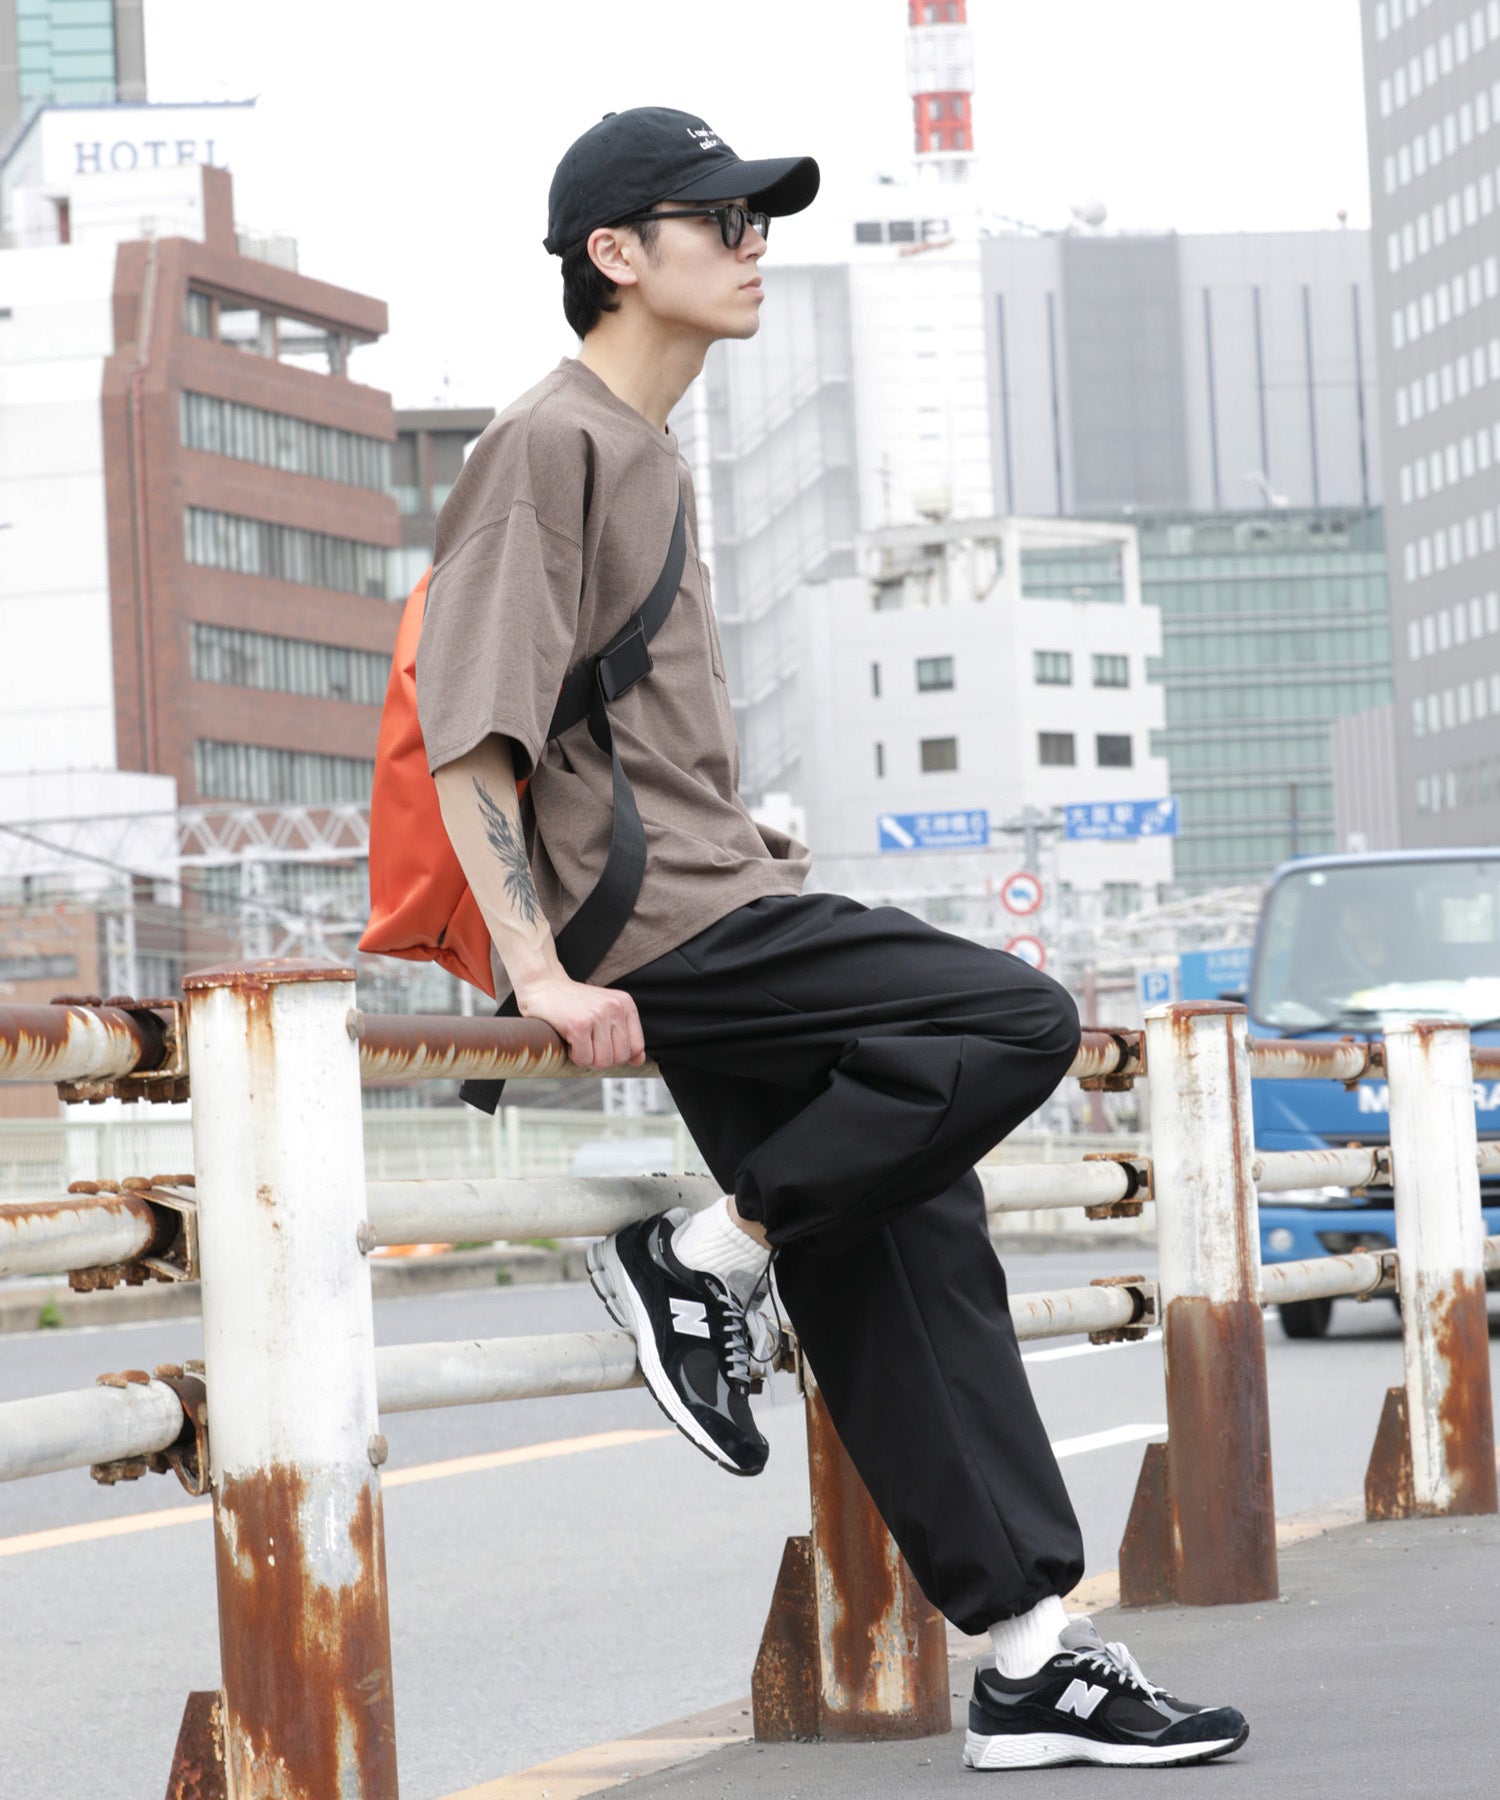 meltum × RUSSELL ATHLETIC DRY POWER BIG T-SHIRT S/S